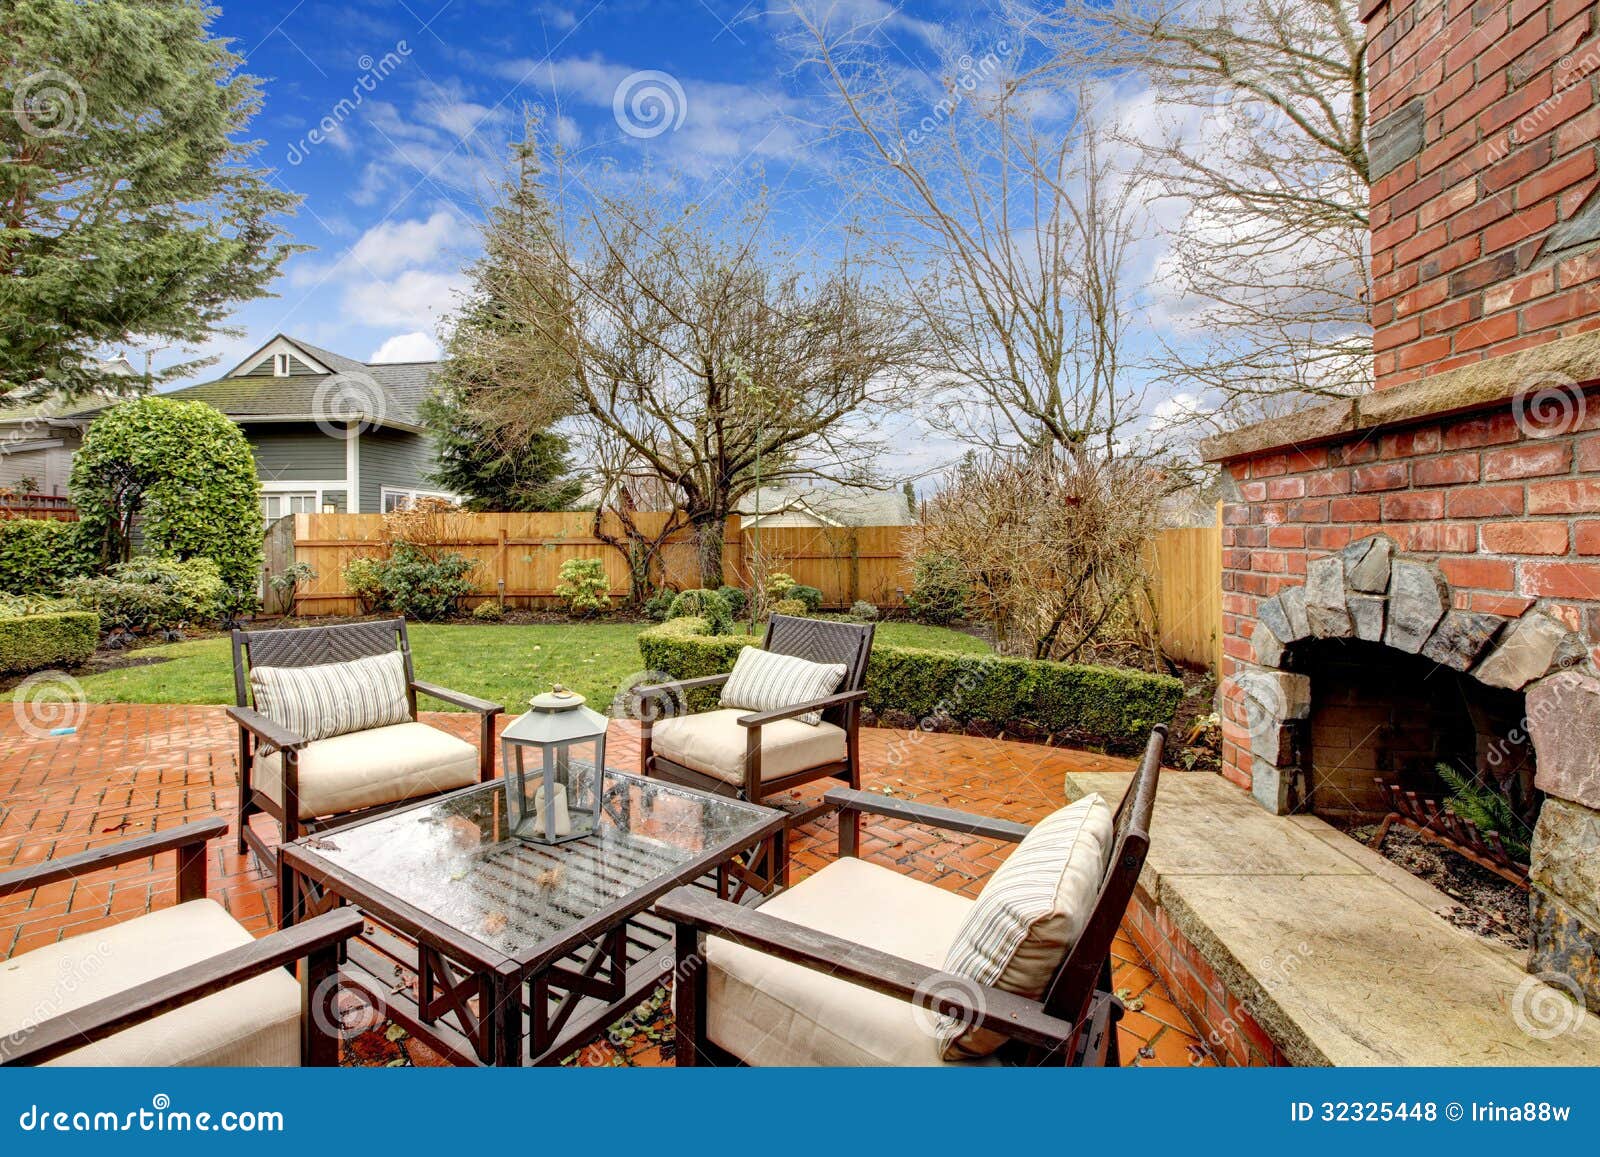 spring backyard with outdoor fireplace and furniture.